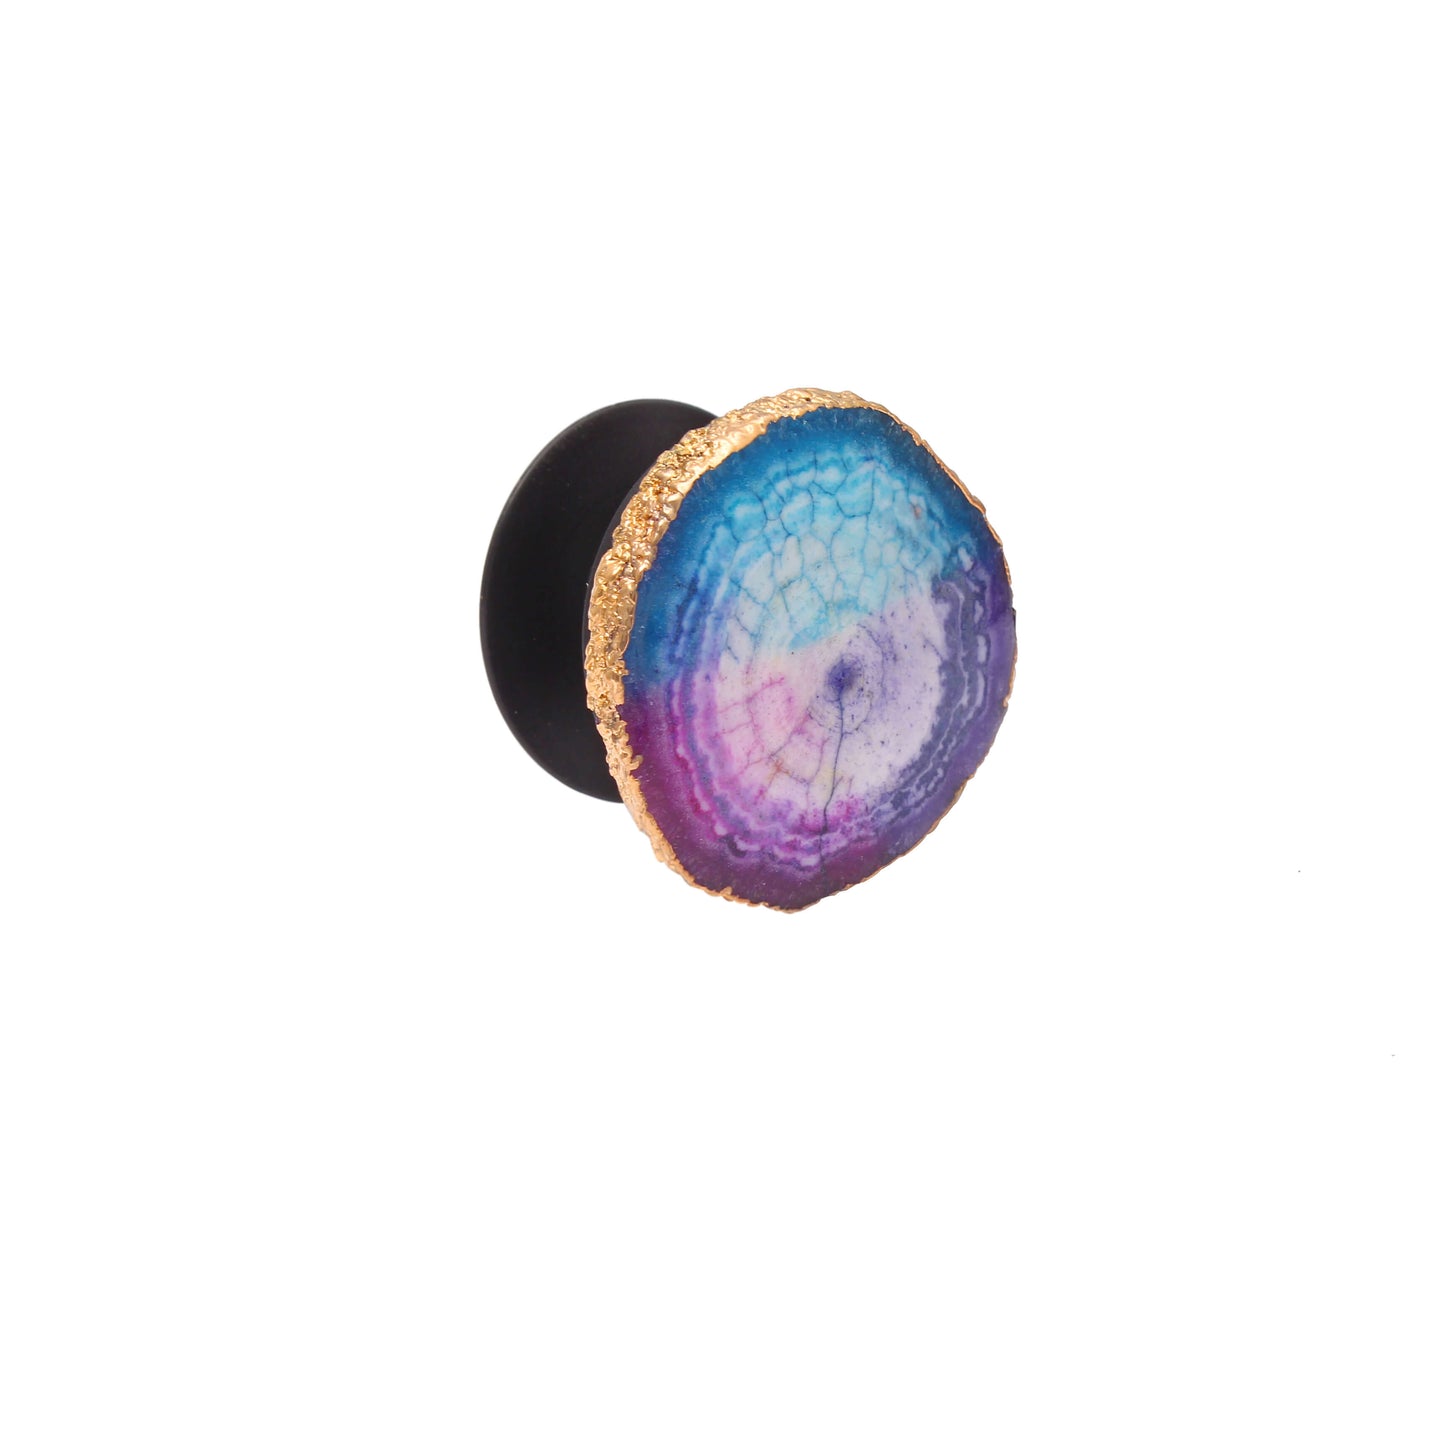 Rainbow Druzy Pop Socket Mobile Holder with Gold Plated Edges - Unique and Stylish Phone Grip